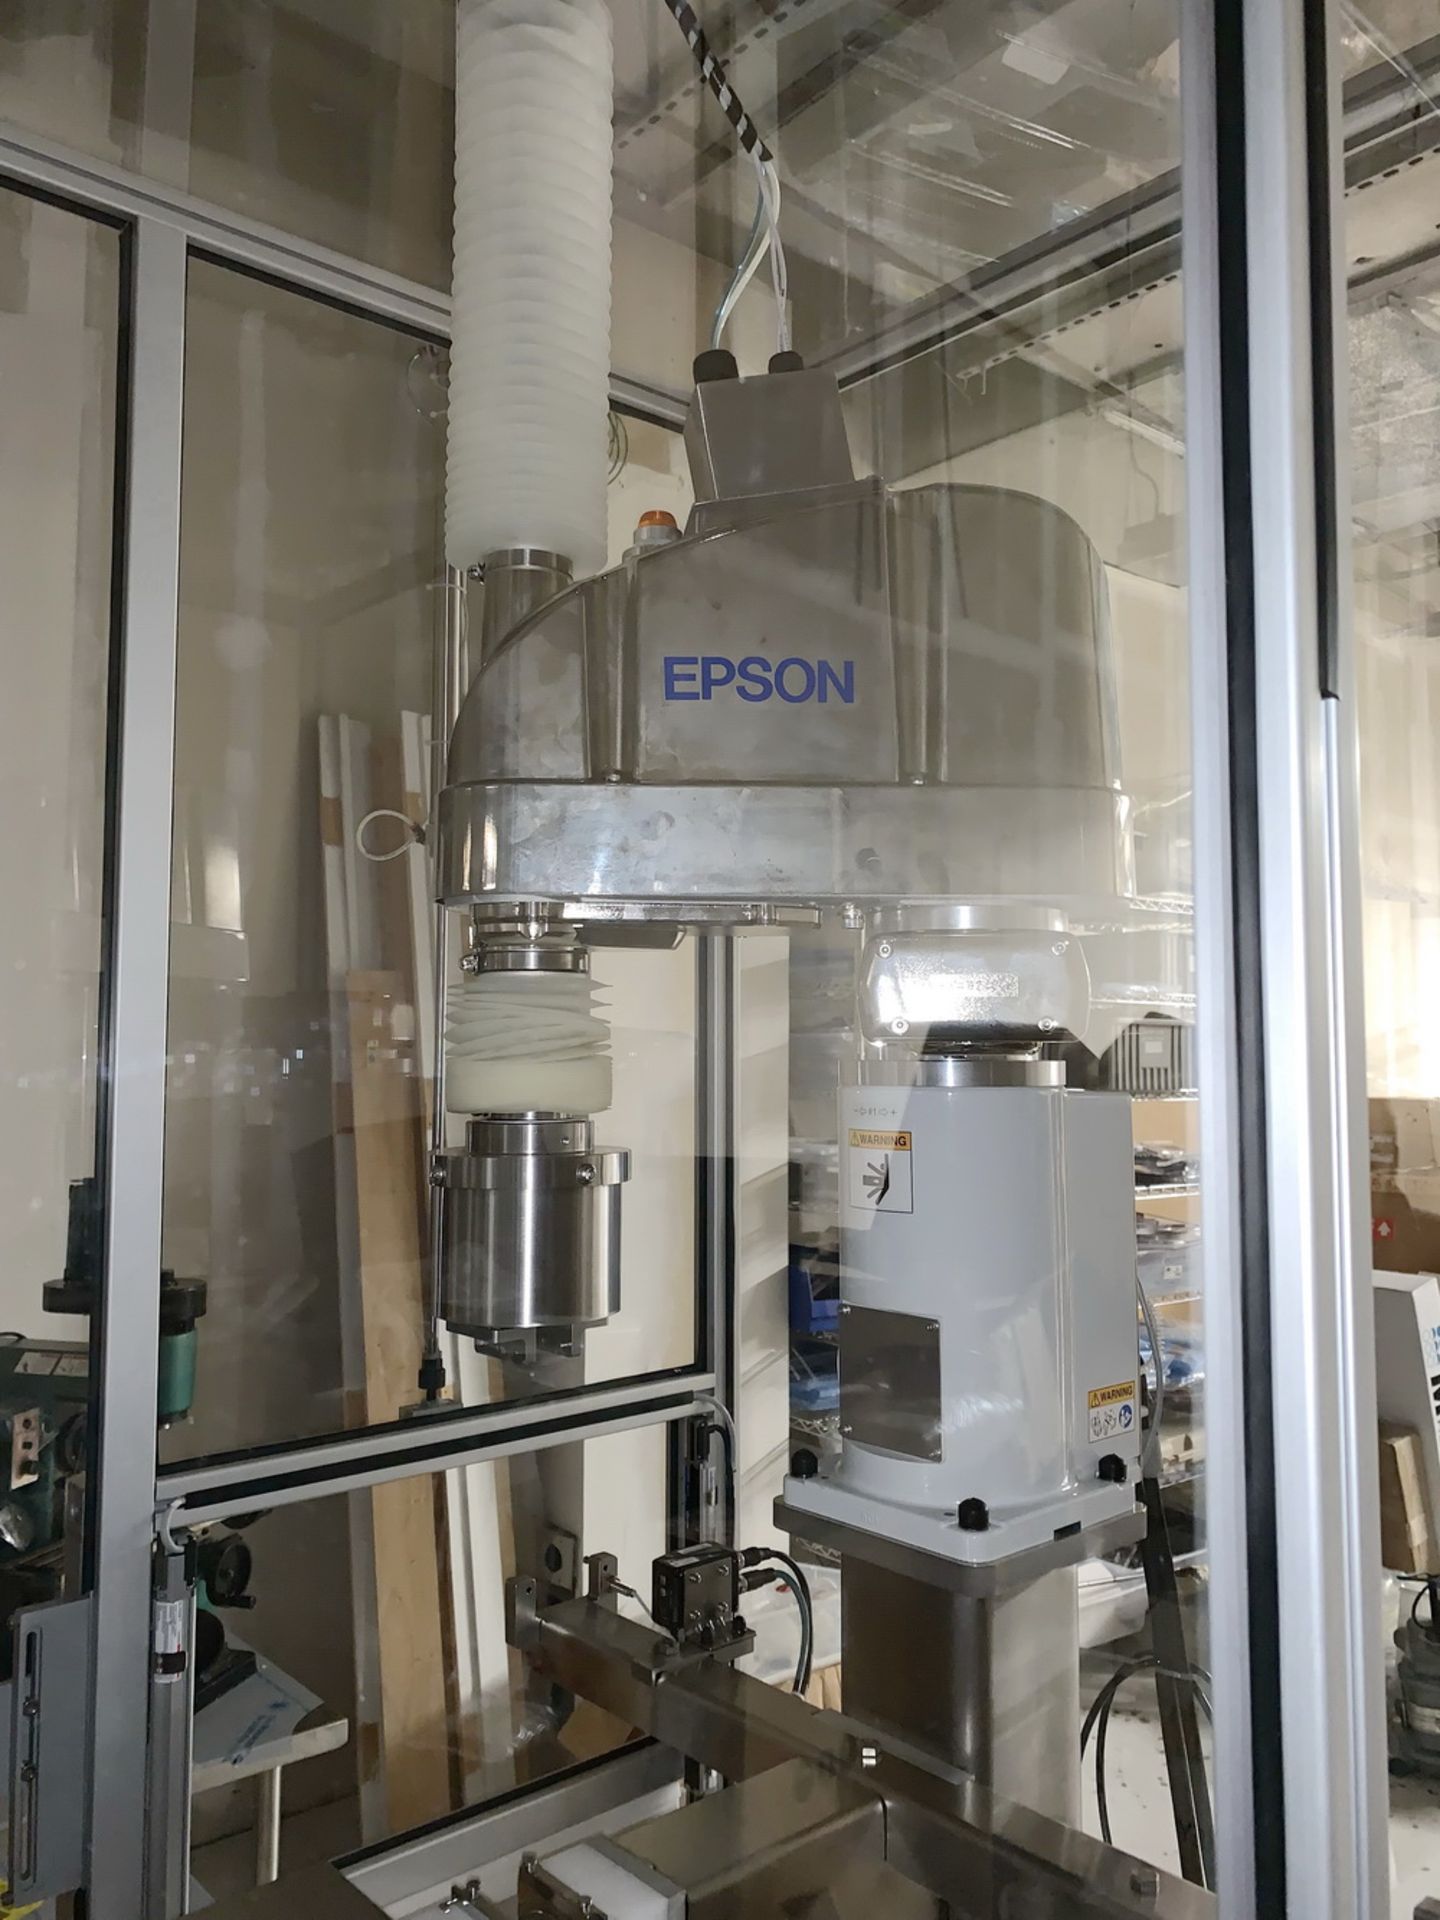 Lightly Used Seiko Epson Robotic Patch/Film/Tissue Testing and Manipulation Station - Image 11 of 13